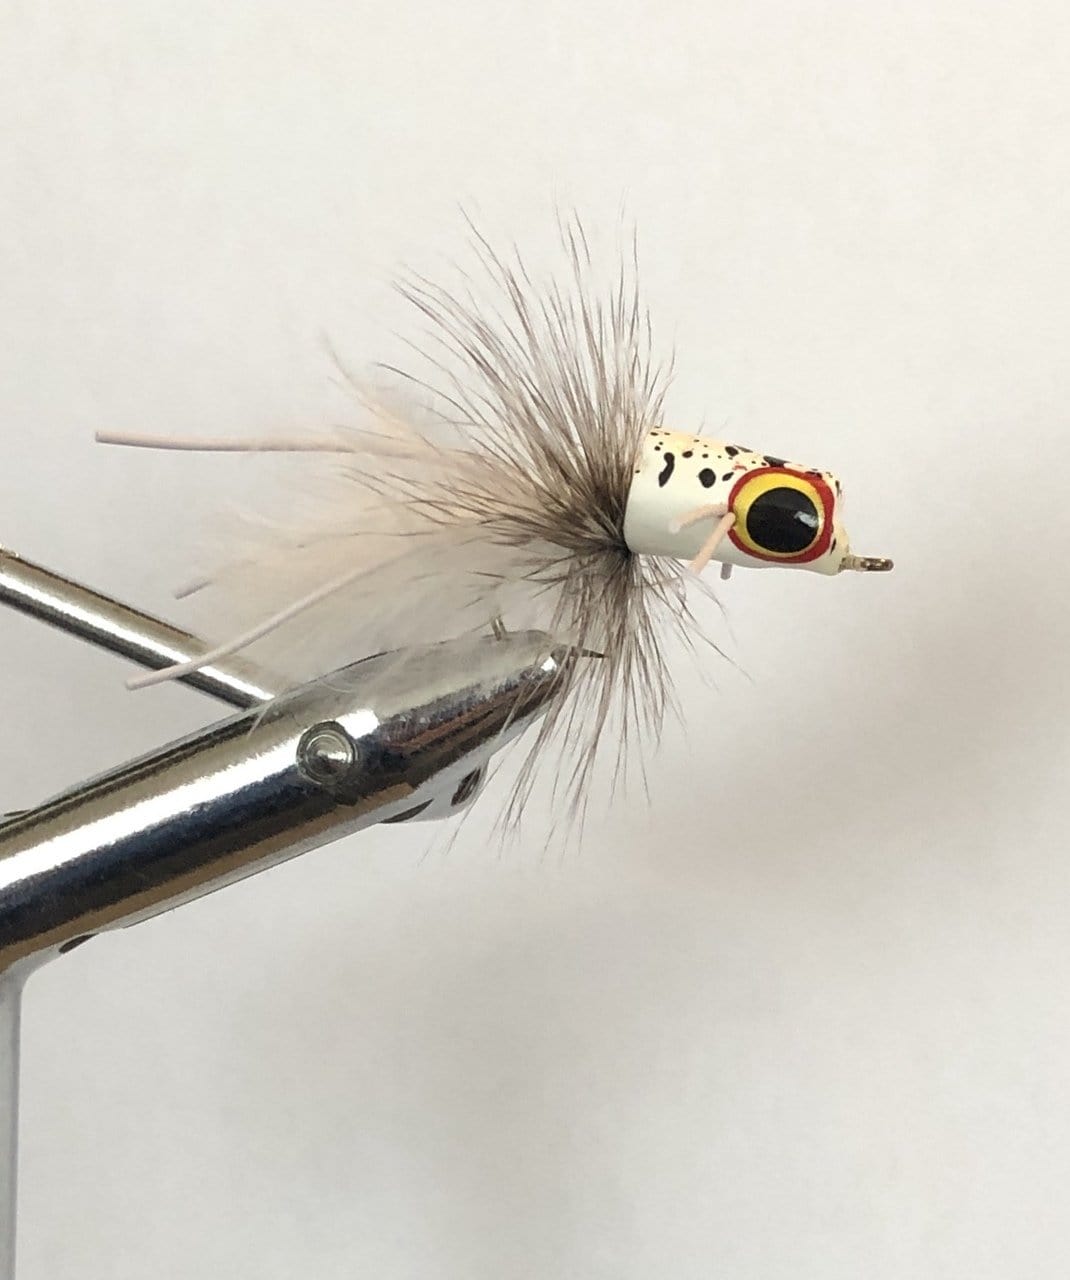 Wild Water Fly Fishing Glow In The Dark Snub Nose Slider Popper, Size 6, Qty. 4